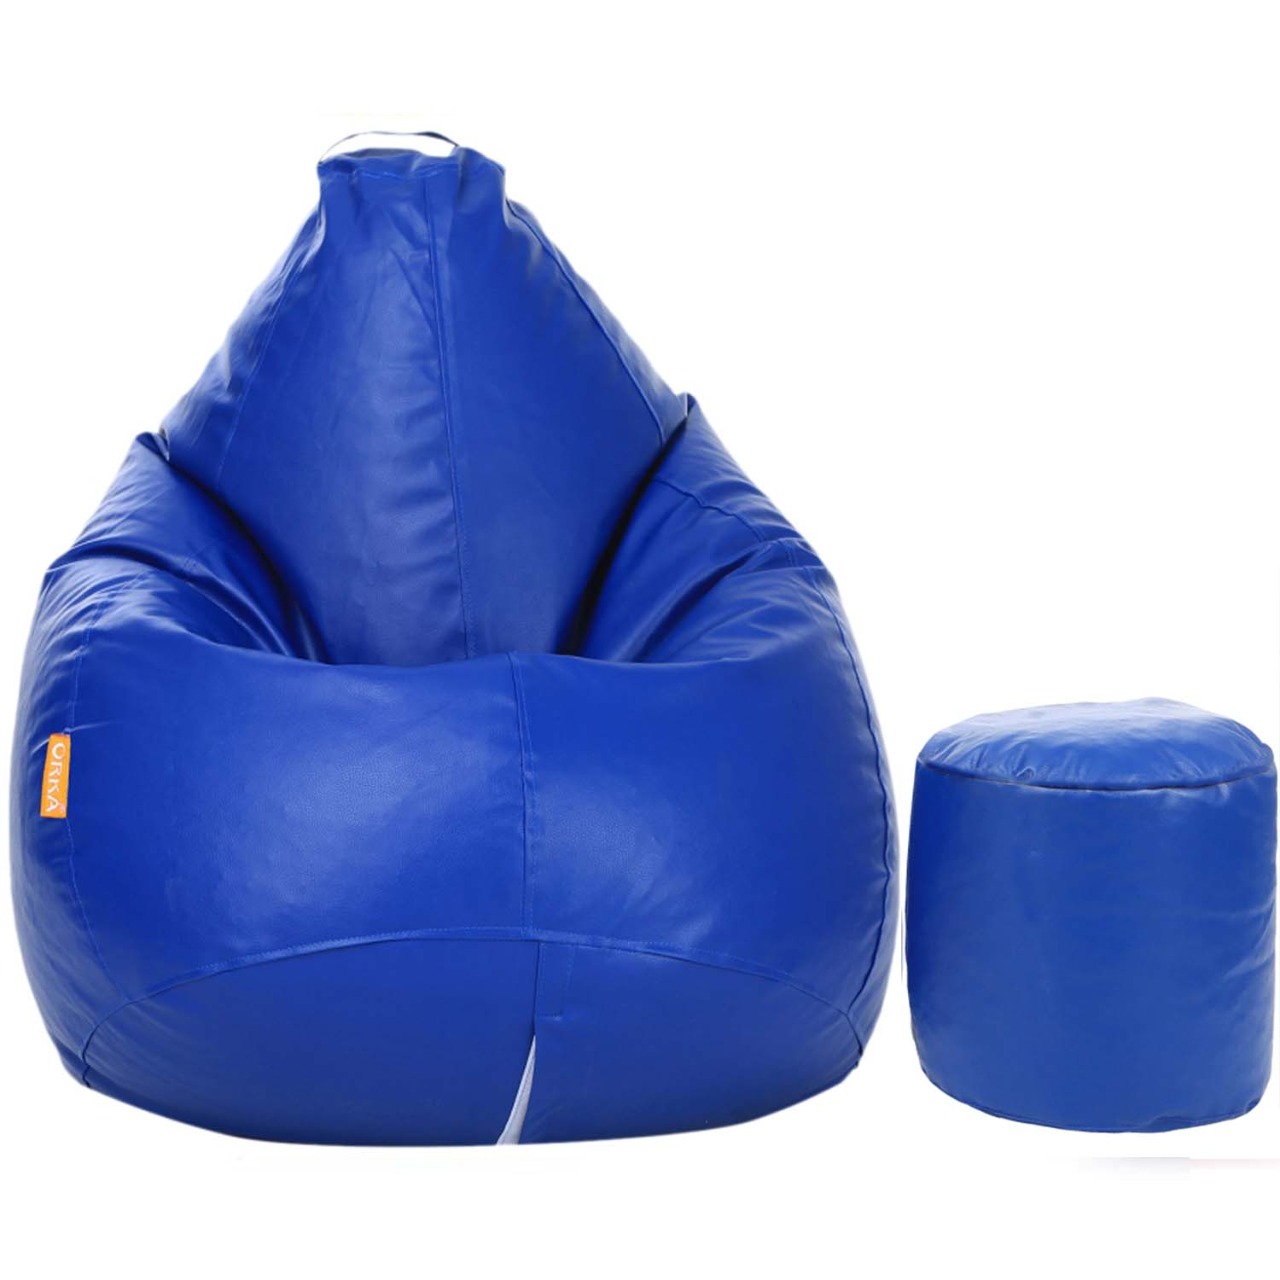 ORKA Classic Blue Bean Bag With Matching Puffy